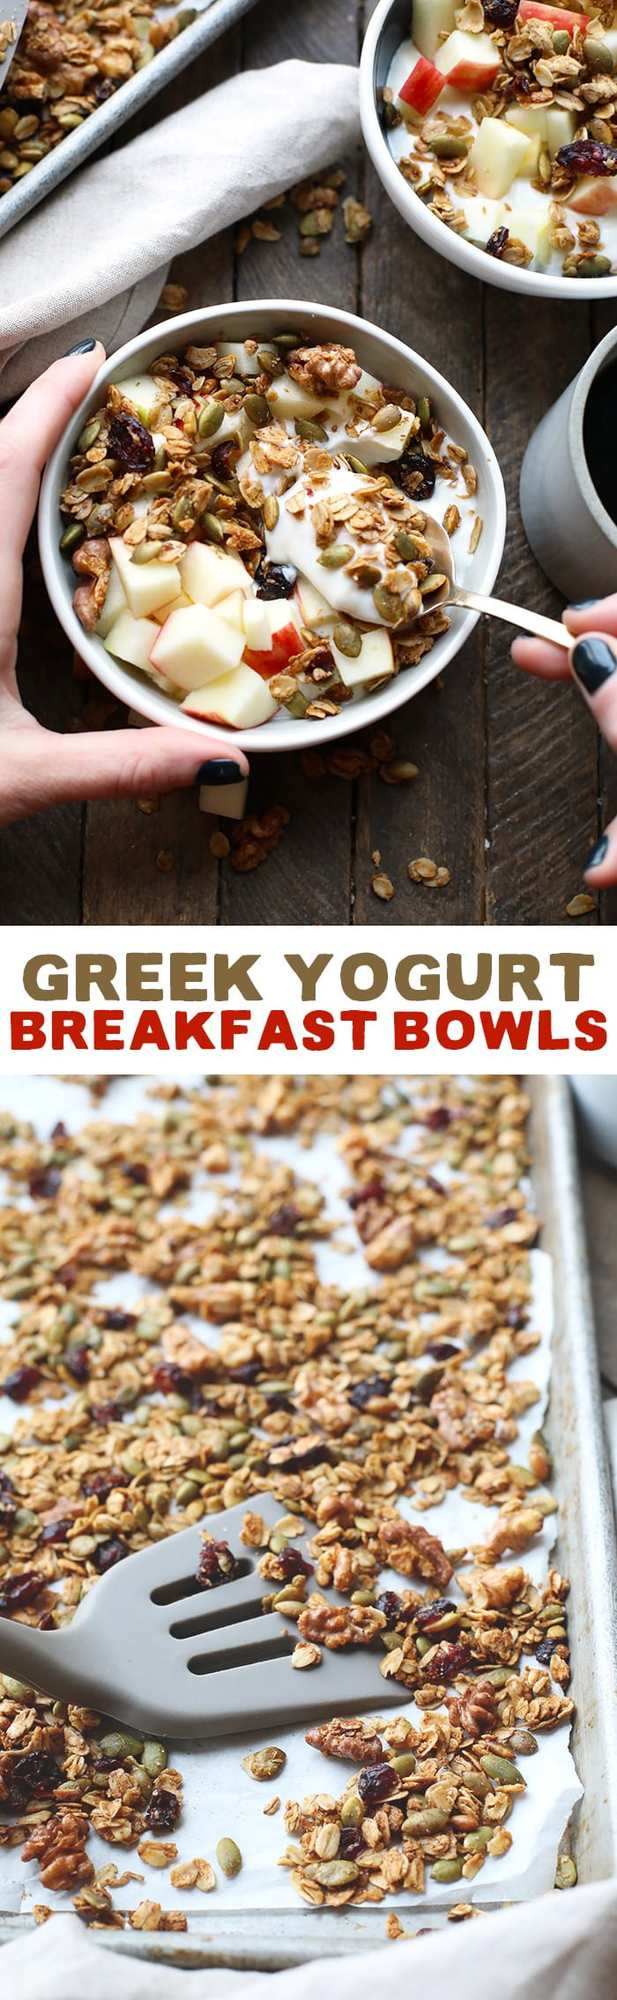 Kickstart 2017 with a breakfast packed with protein, whole grains, and fresh fruit! Prep your Greek yogurt breakfast bowls ahead of time for an easy grab and go in the AM. 